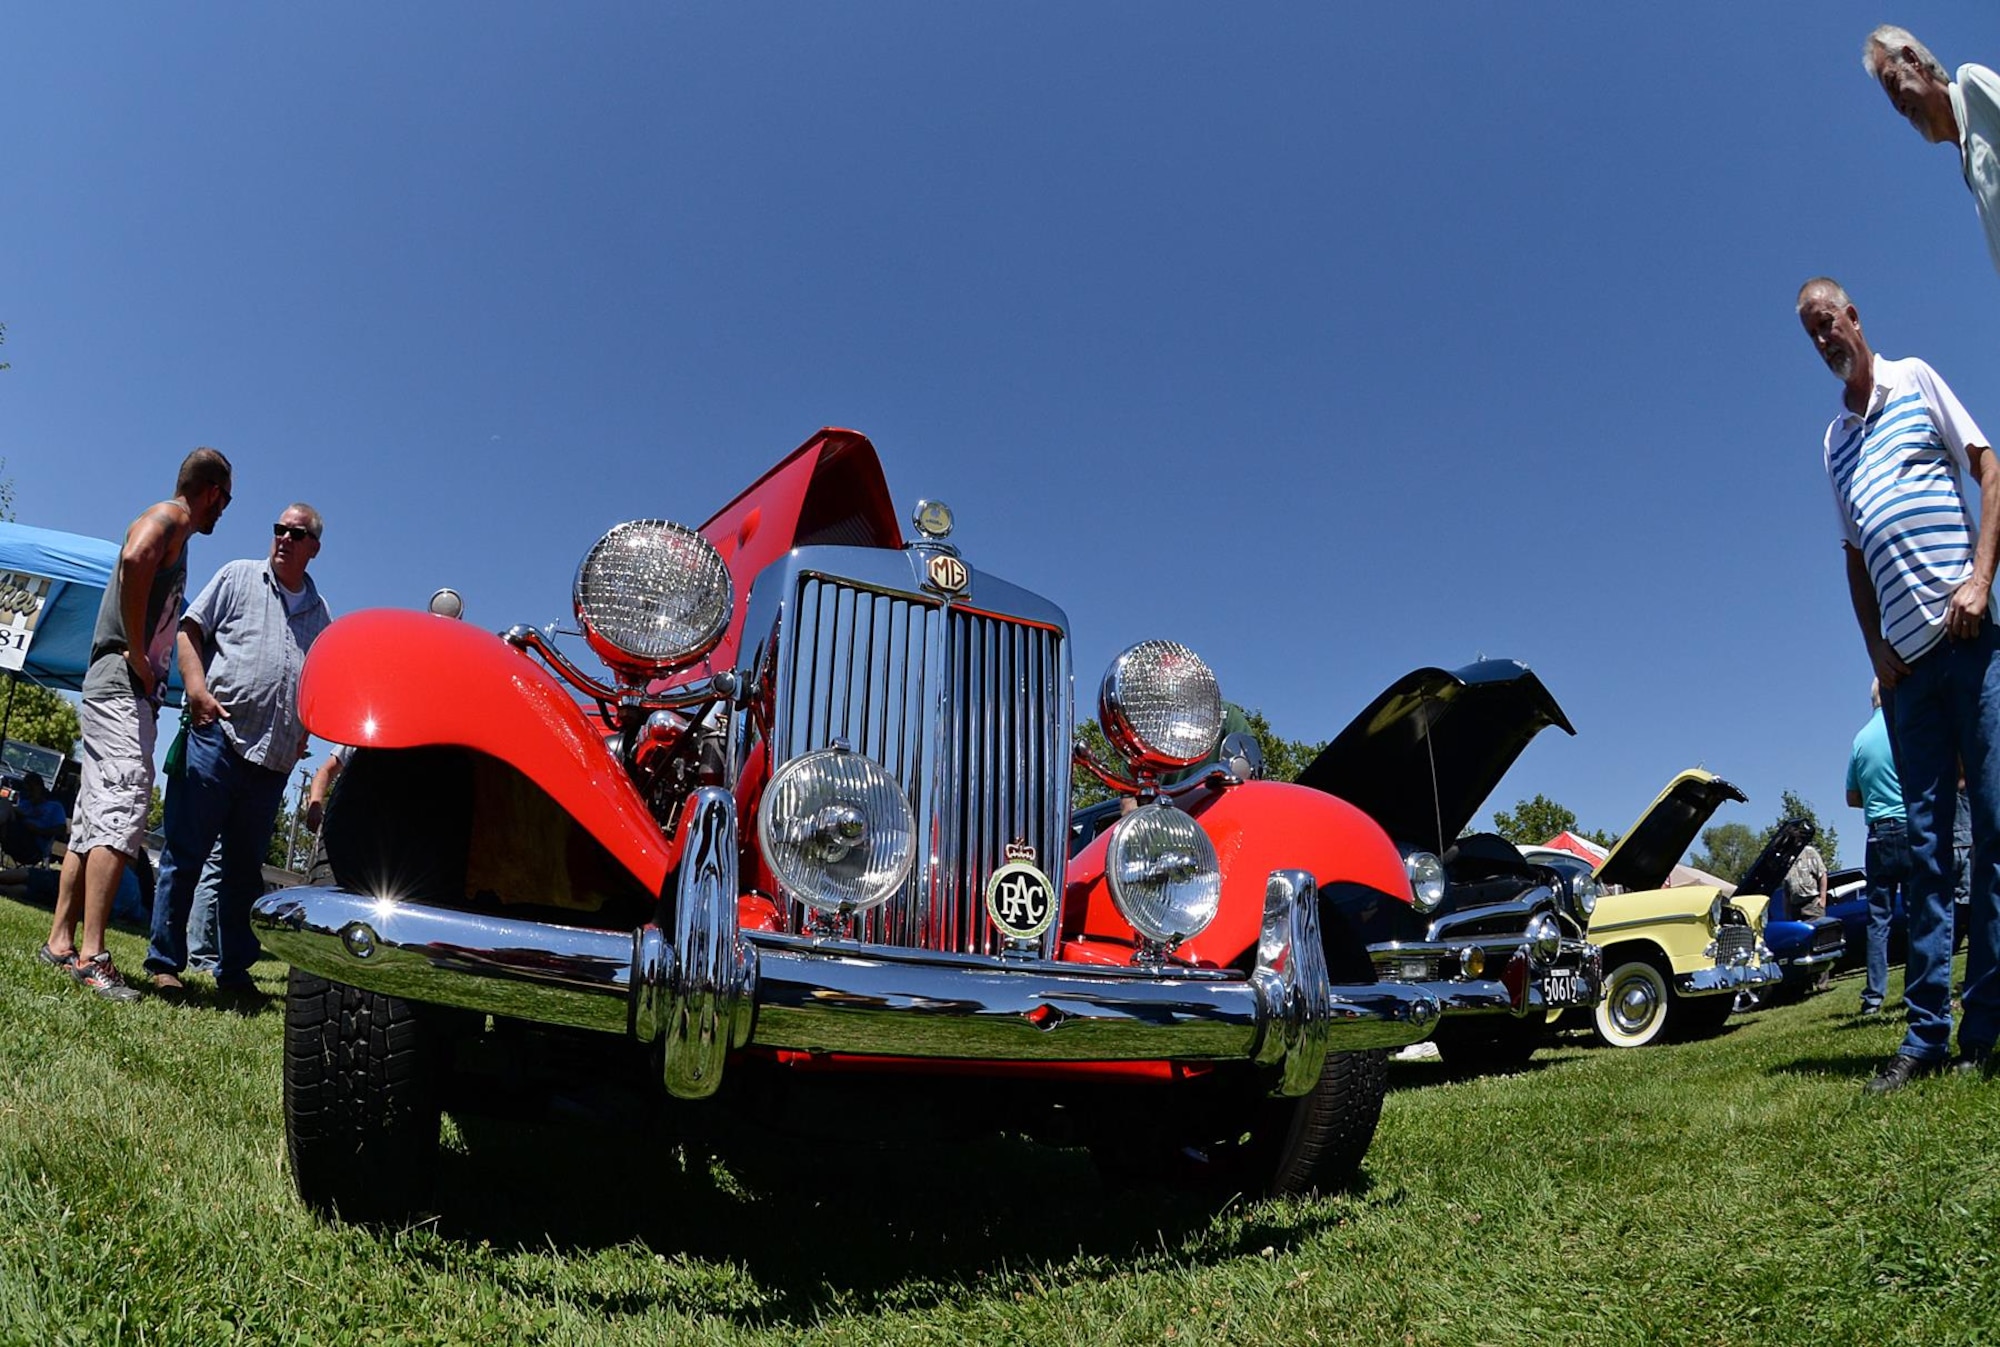 Car enthusiasts stop to look at a 1951 MDT during the Ogden Air Logistics Complex Car Show held July 27 at Hill Air Force Base, Utah. The car won the Best Restoration prize. (U.S. Air Force photo by Alex R. Lloyd)